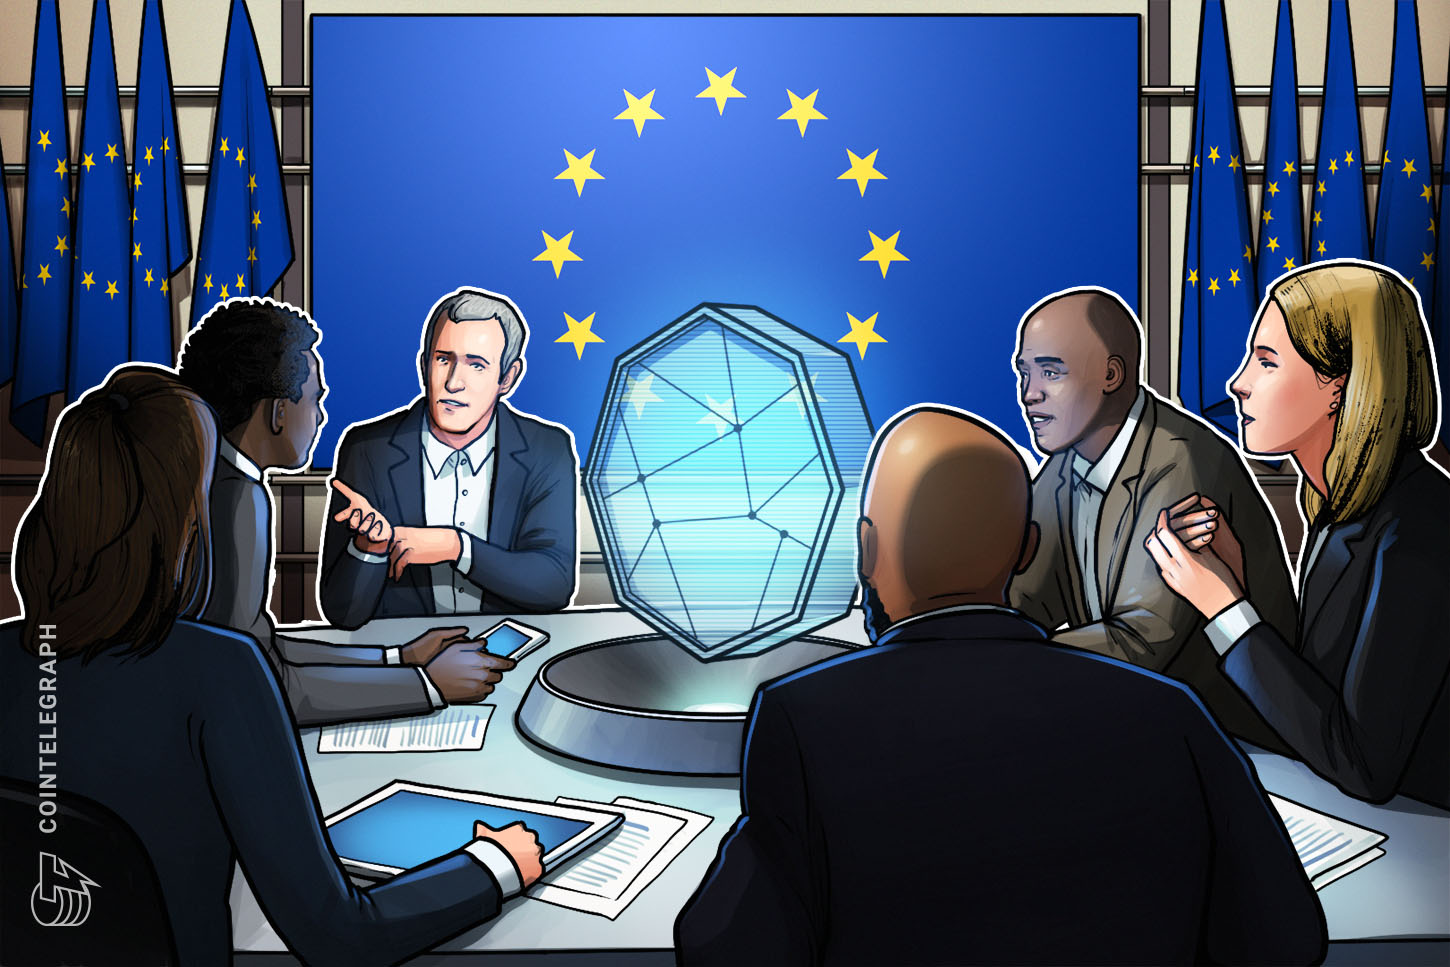 Chasing the most popular traits in crypto, the EU works to rein in stablecoins and DeFi